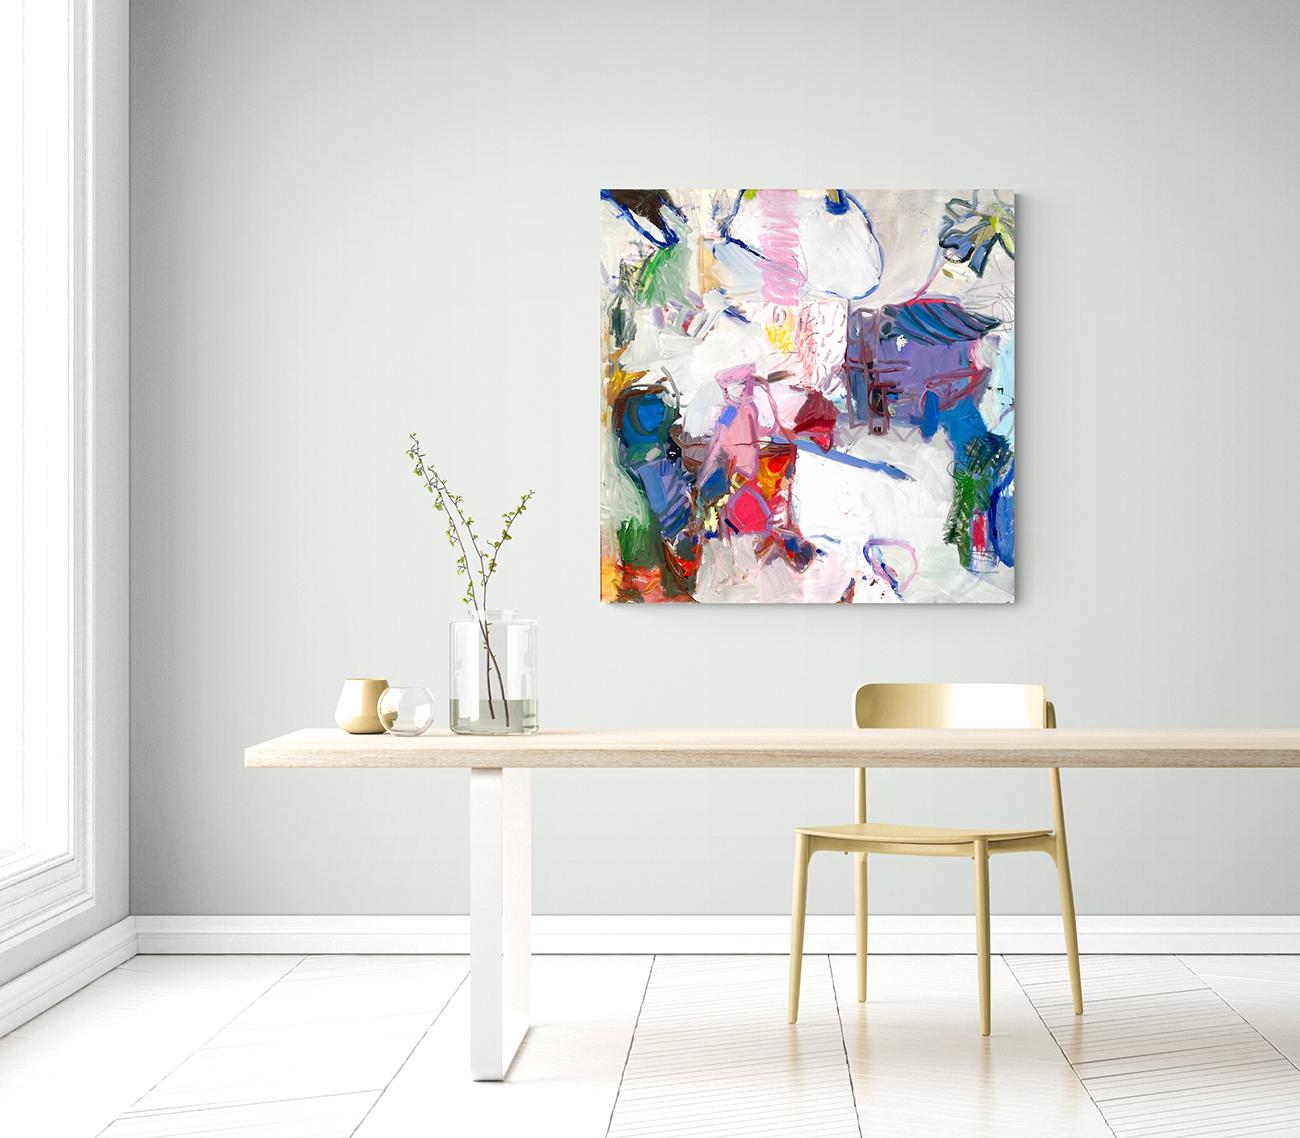 Something Will Show Us The Way (Abstract painting)
Oil on canvas — Unframed.
This artwork is exclusive to IdeelArt.

German artist Petra Schott uses colour, lines, and shapes to express her everyday emotions on canvas. During her creative process,